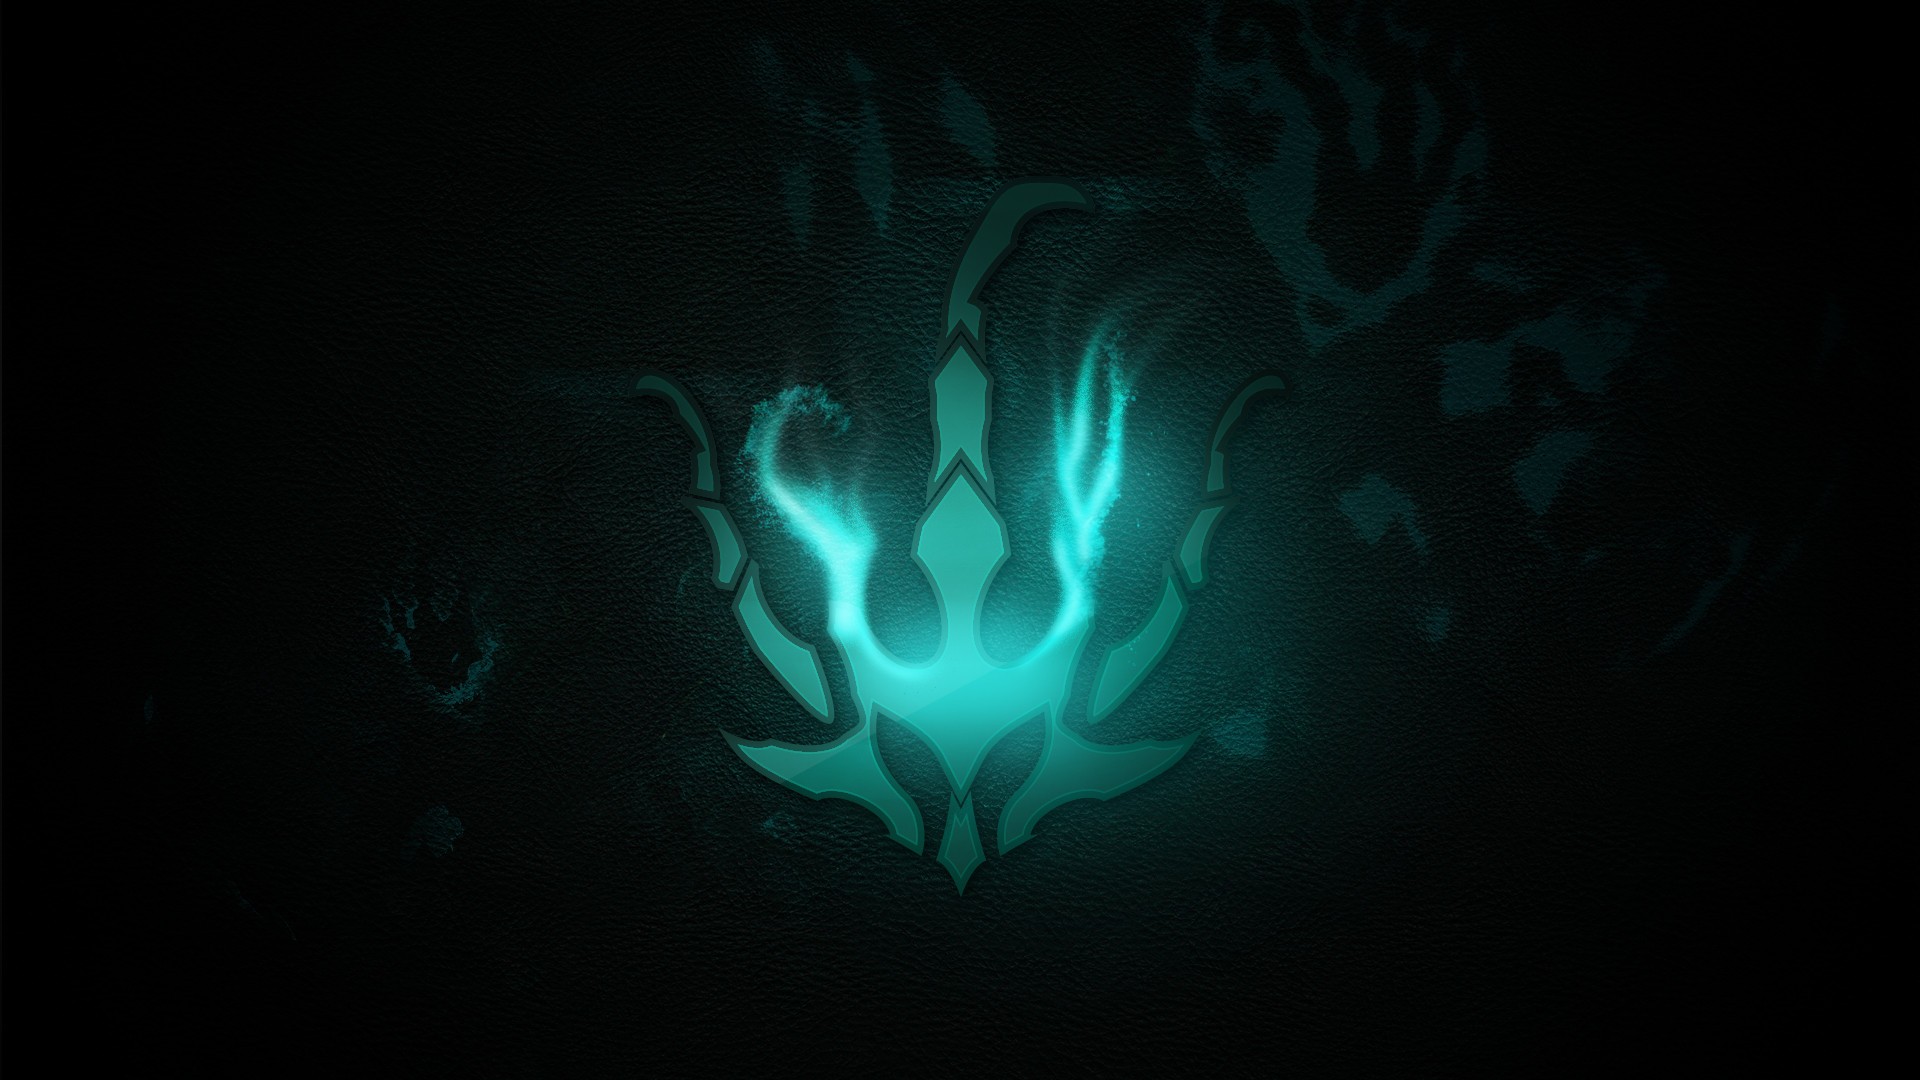 General 1920x1080 Riot Games League of Legends Thresh turquoise cyan PC gaming